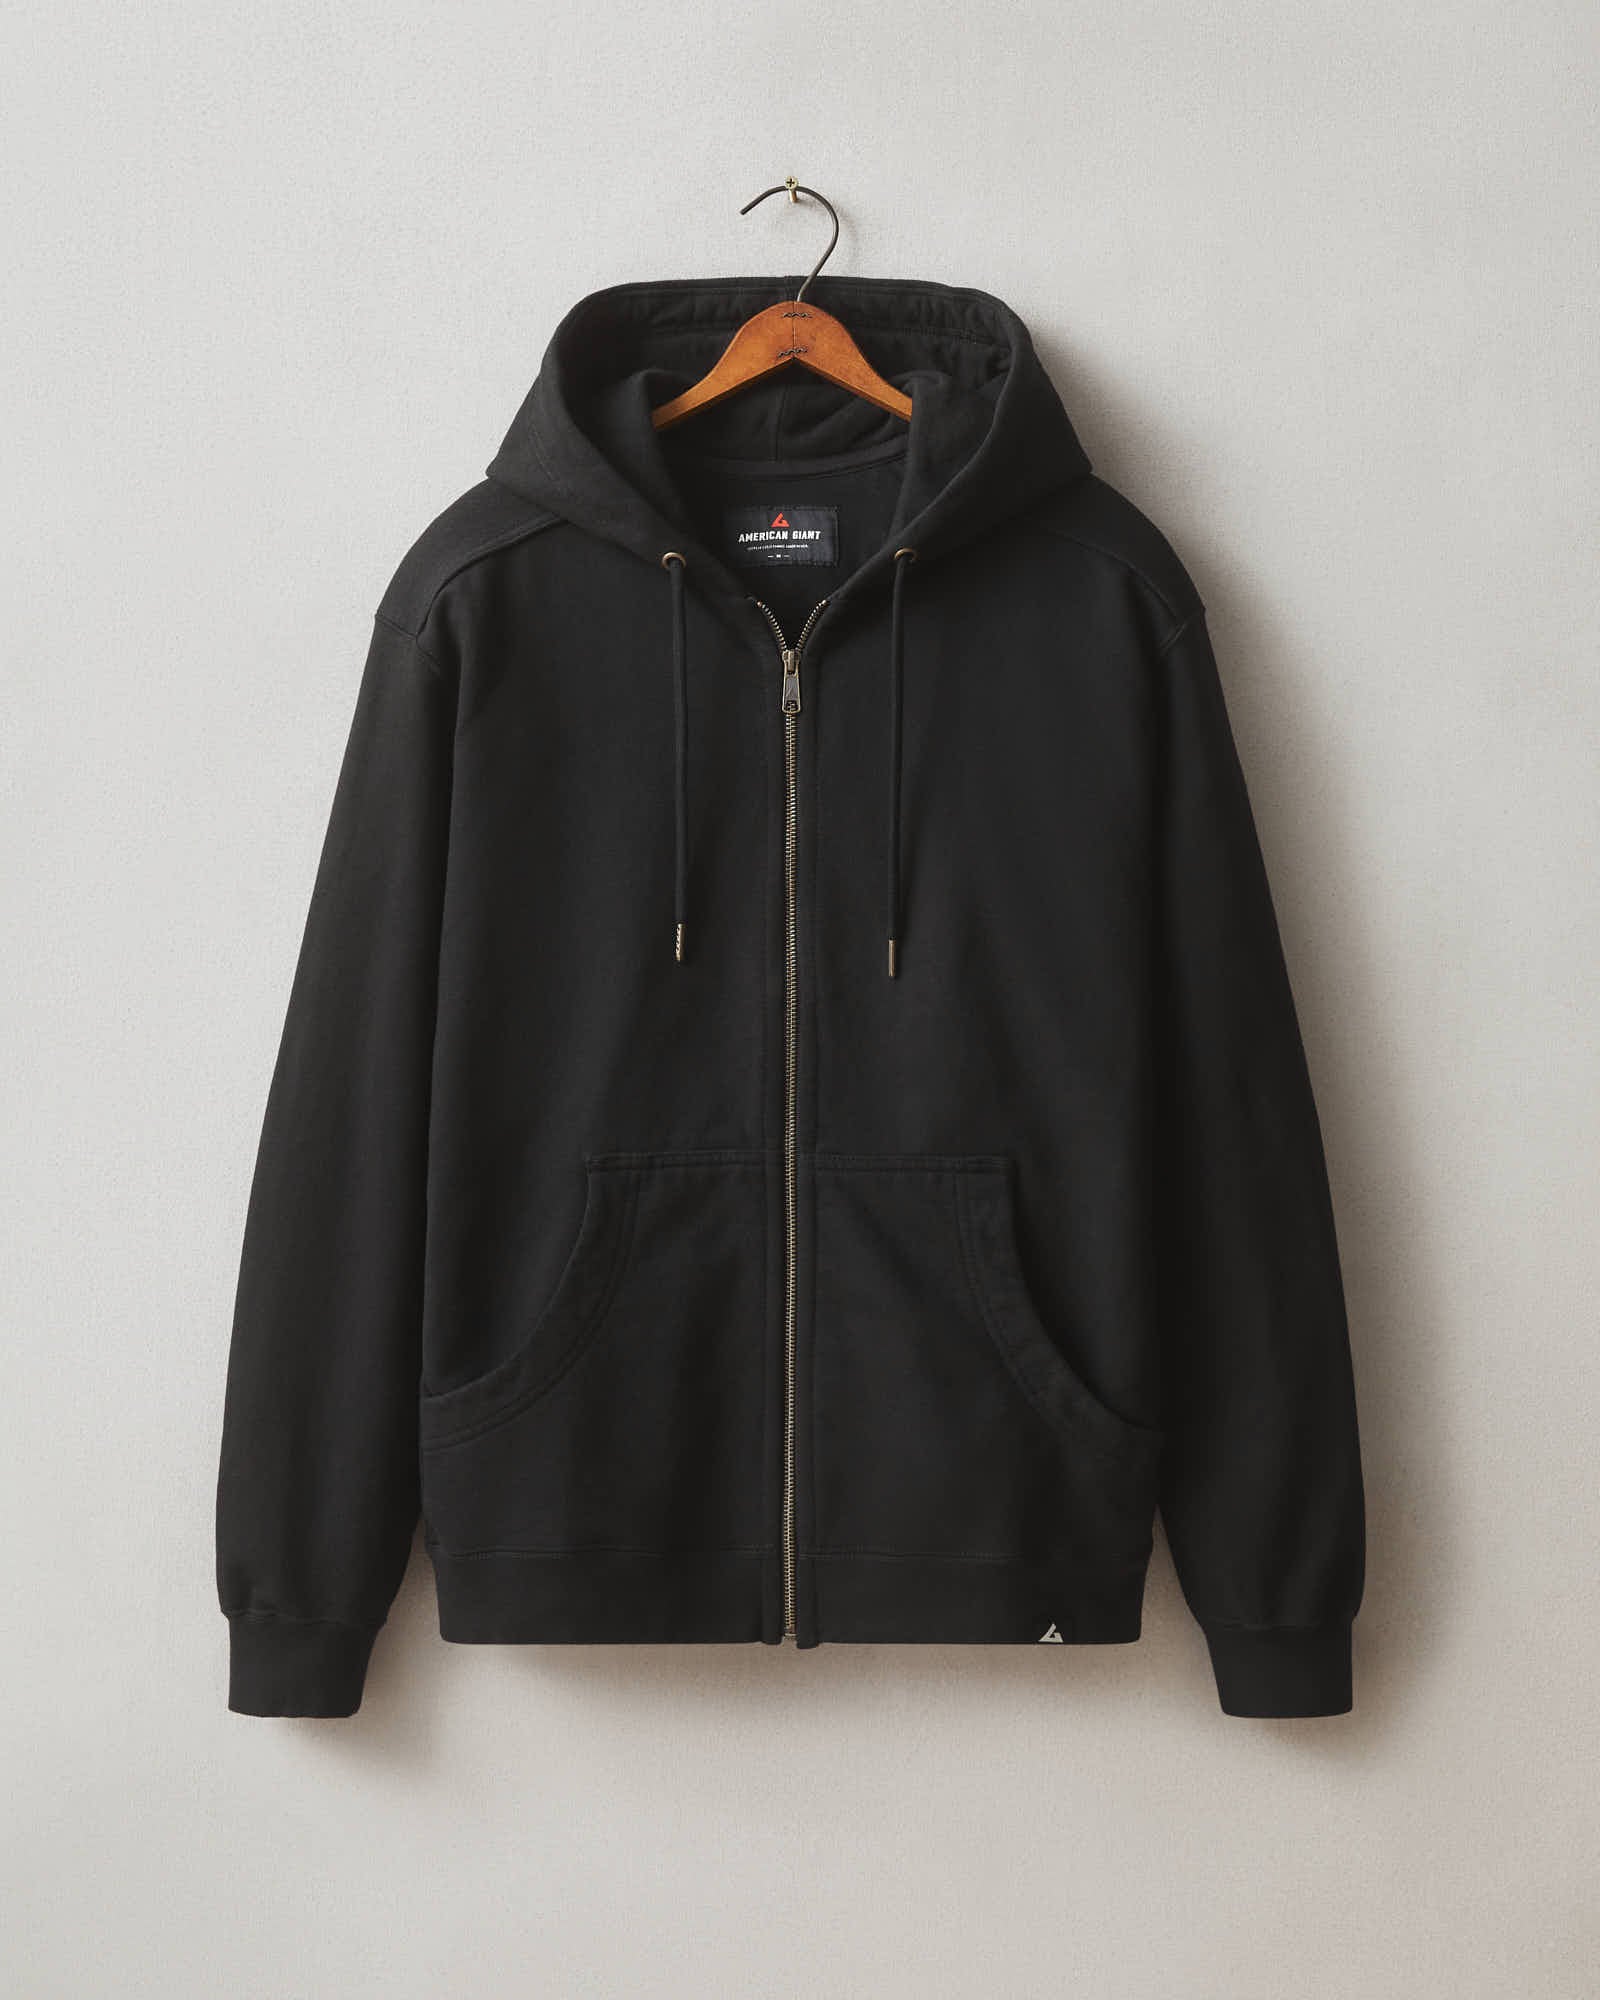 XXL Relaxed Classic Full Zip - Black by American Giant - Made in The USA